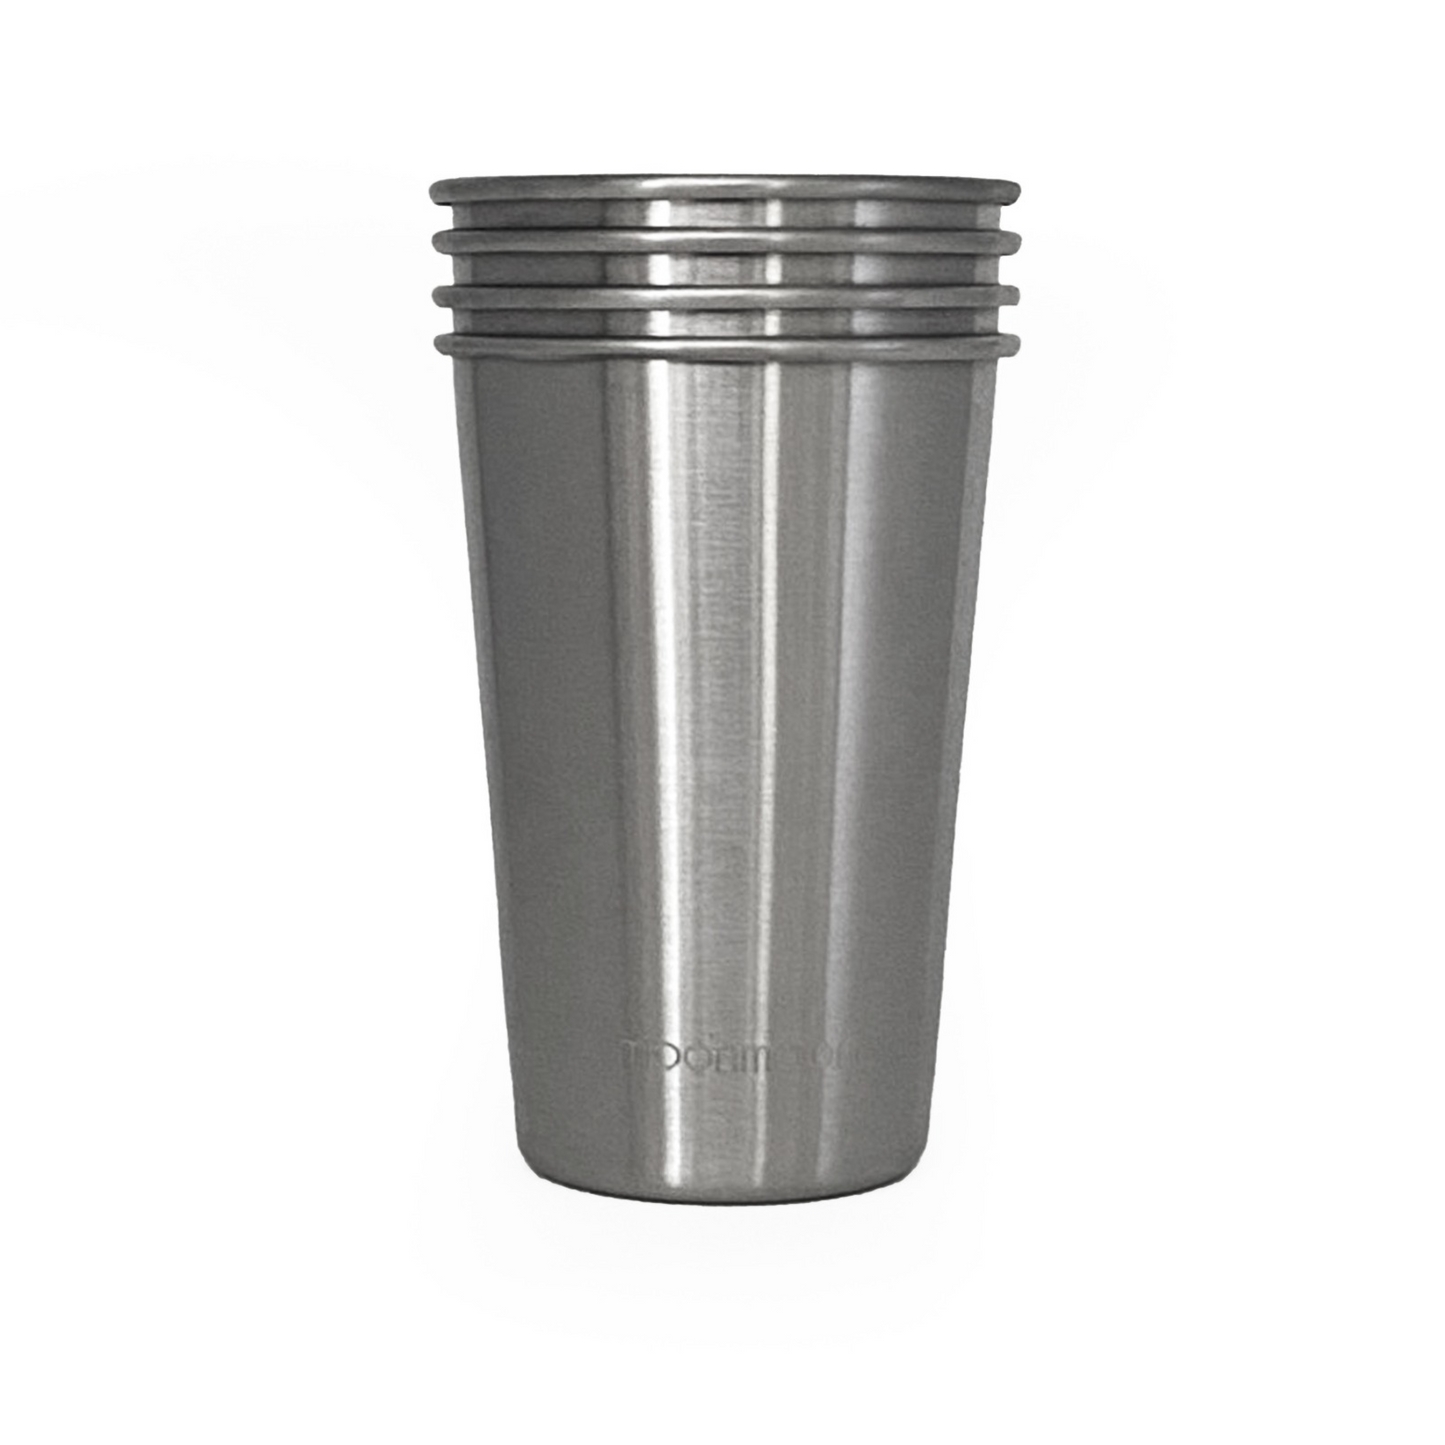 Moonmoon Premium Stainless Steel Cups tumbler benefits reusable wholesale metal cups stainless steel cups for sale stainless steel cups for kids stainless steel cups wholesale stainless steel cups near me stainless steel cups supplier UK